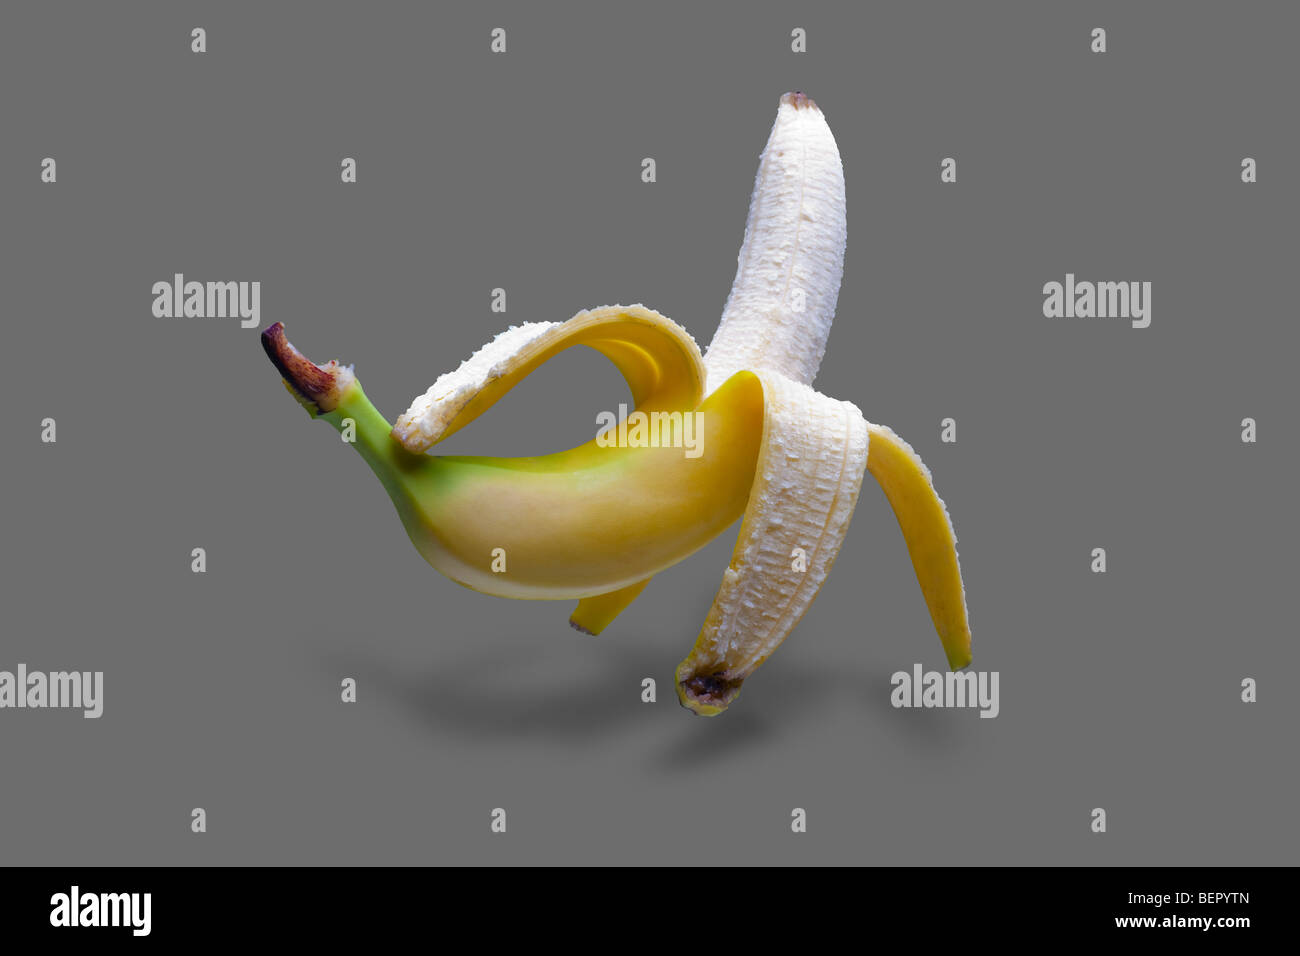 Nice floating banana on grey background with shadow under it Stock ...